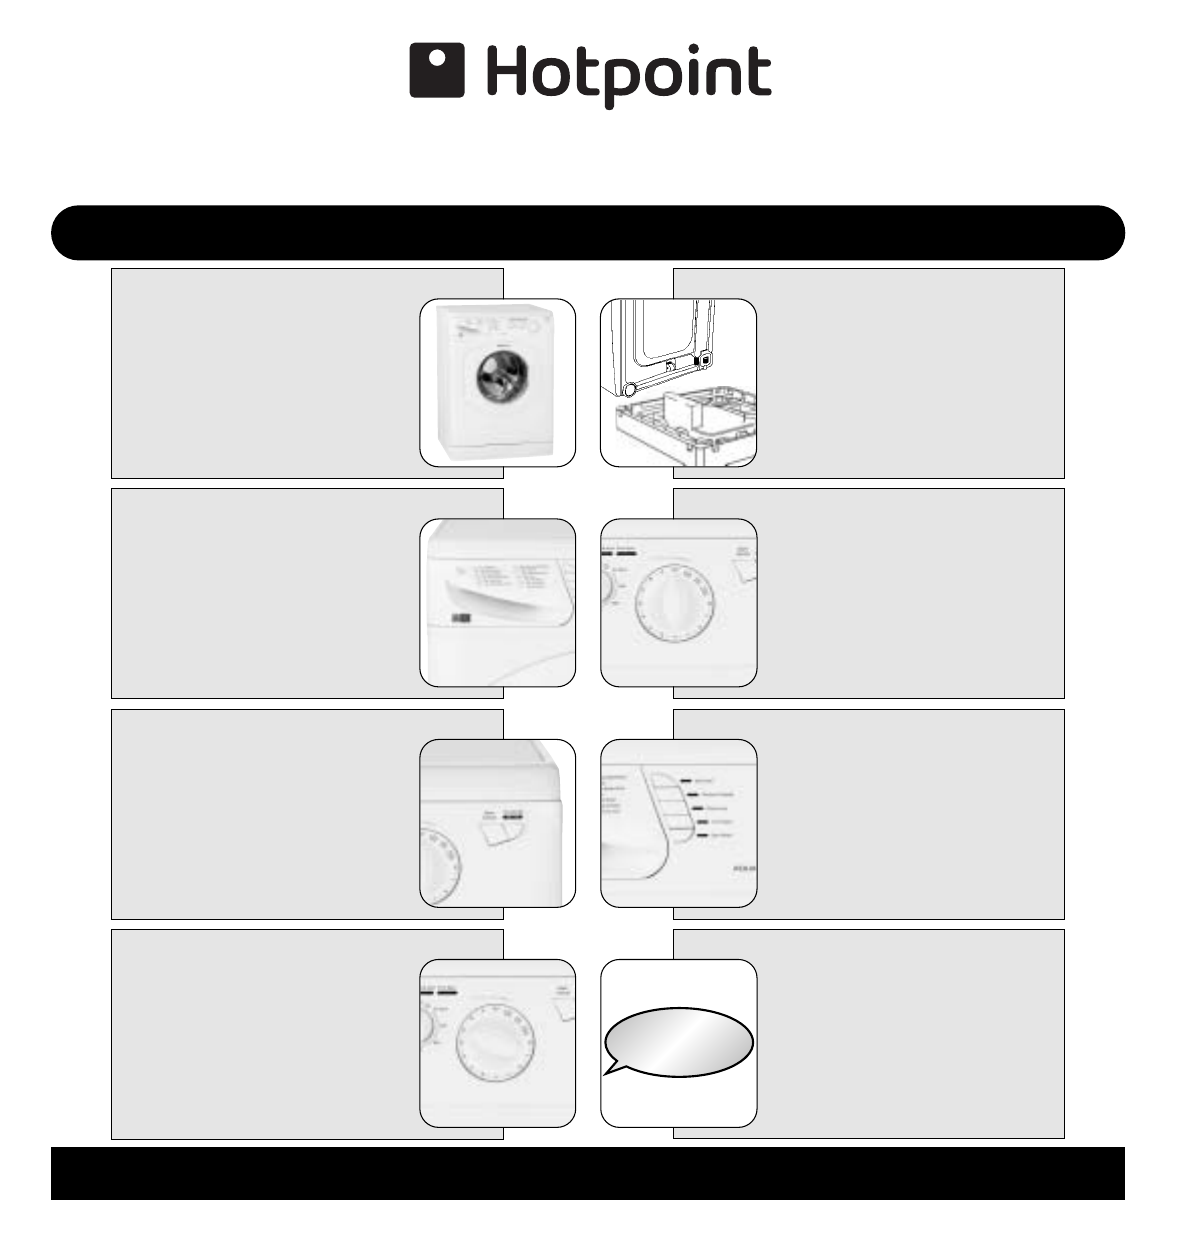 User manual for hotpoint washing machine